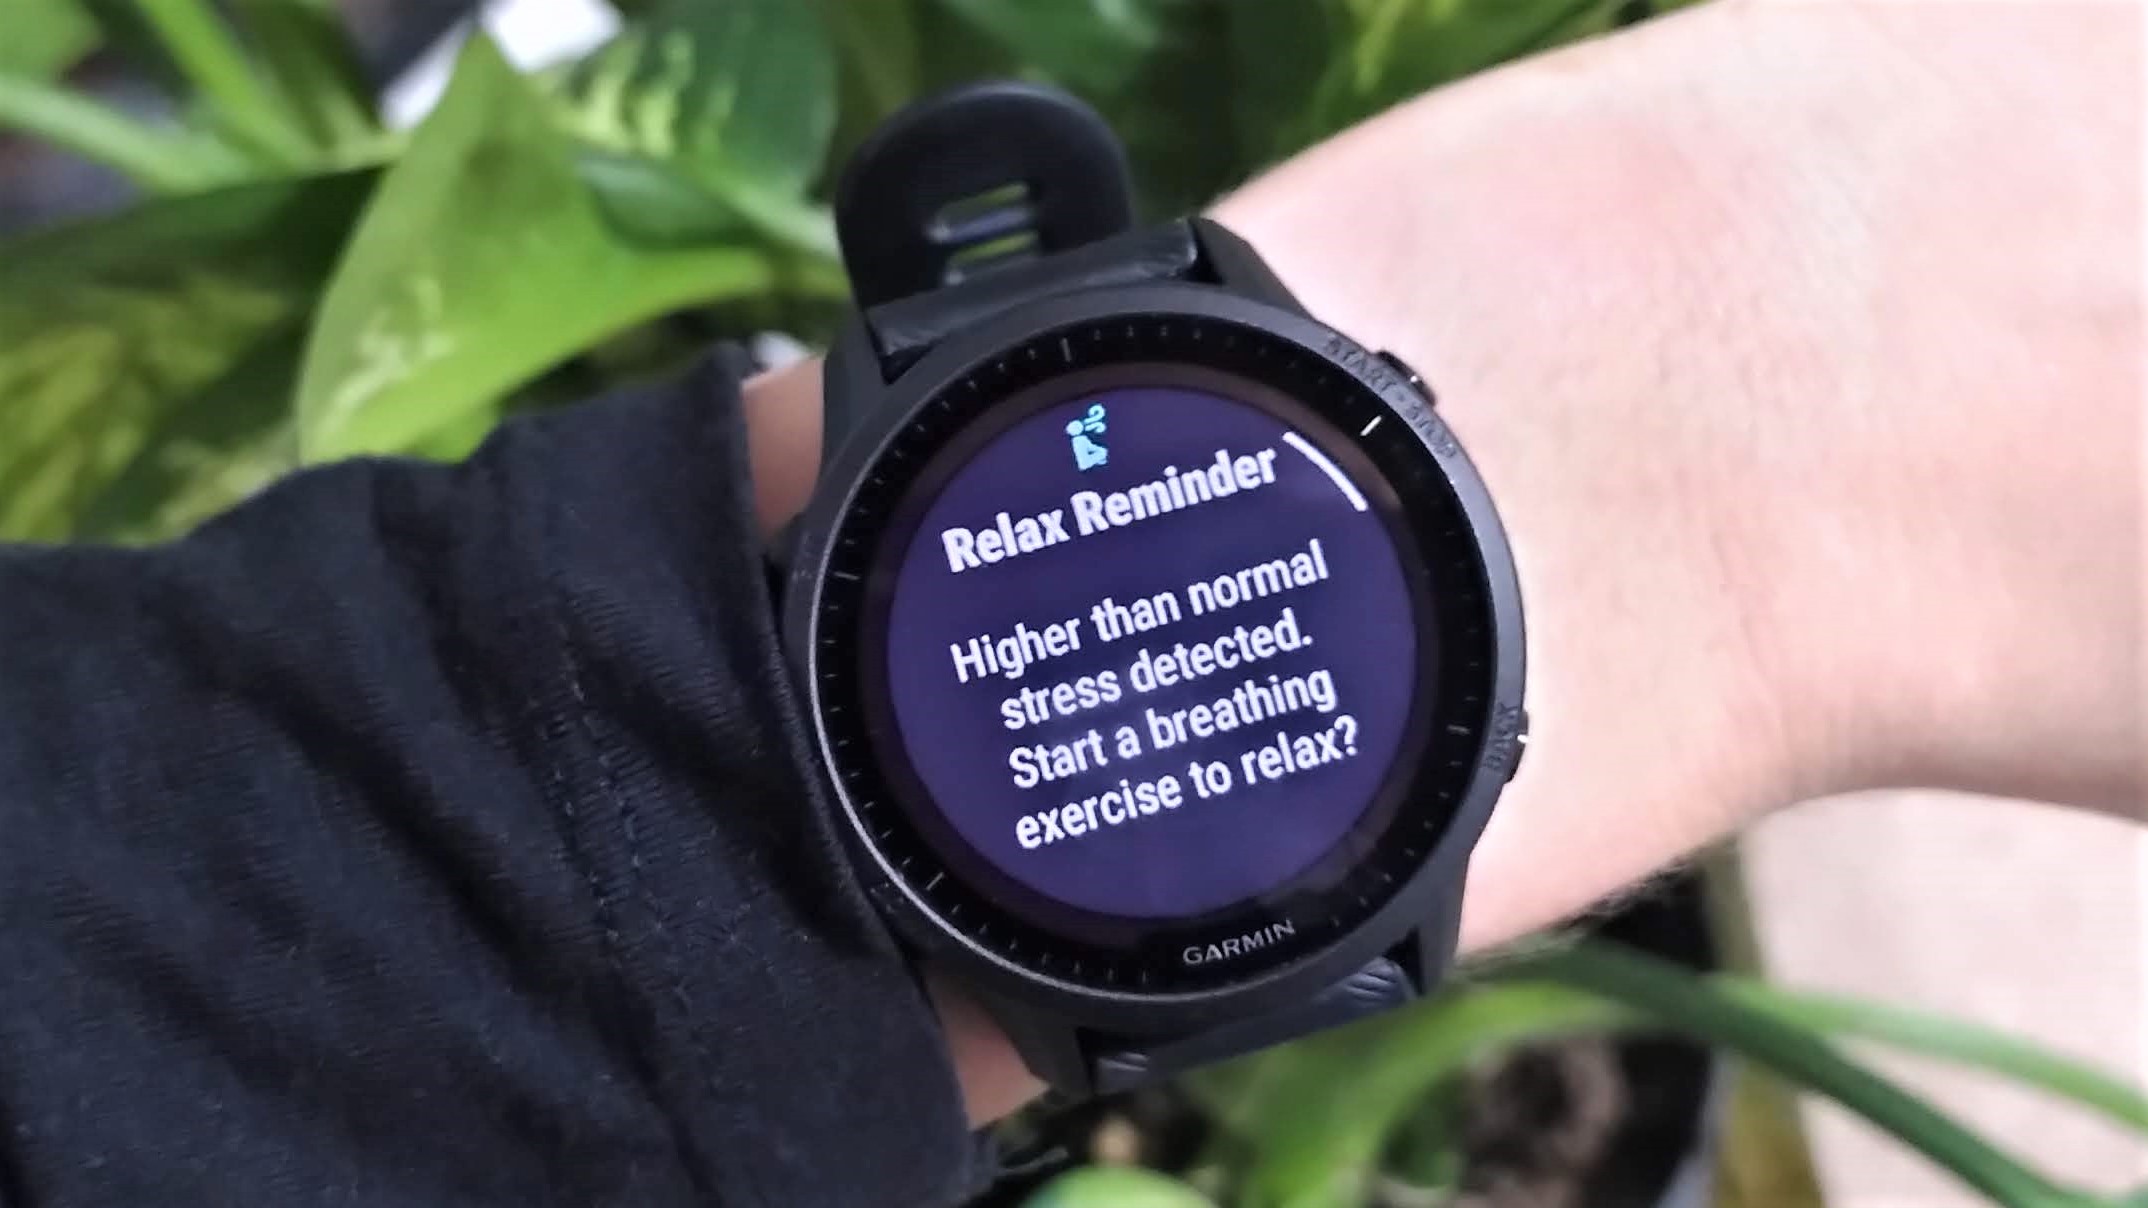 If your Garmin watch is giving you stress warnings, ignore | Advnture